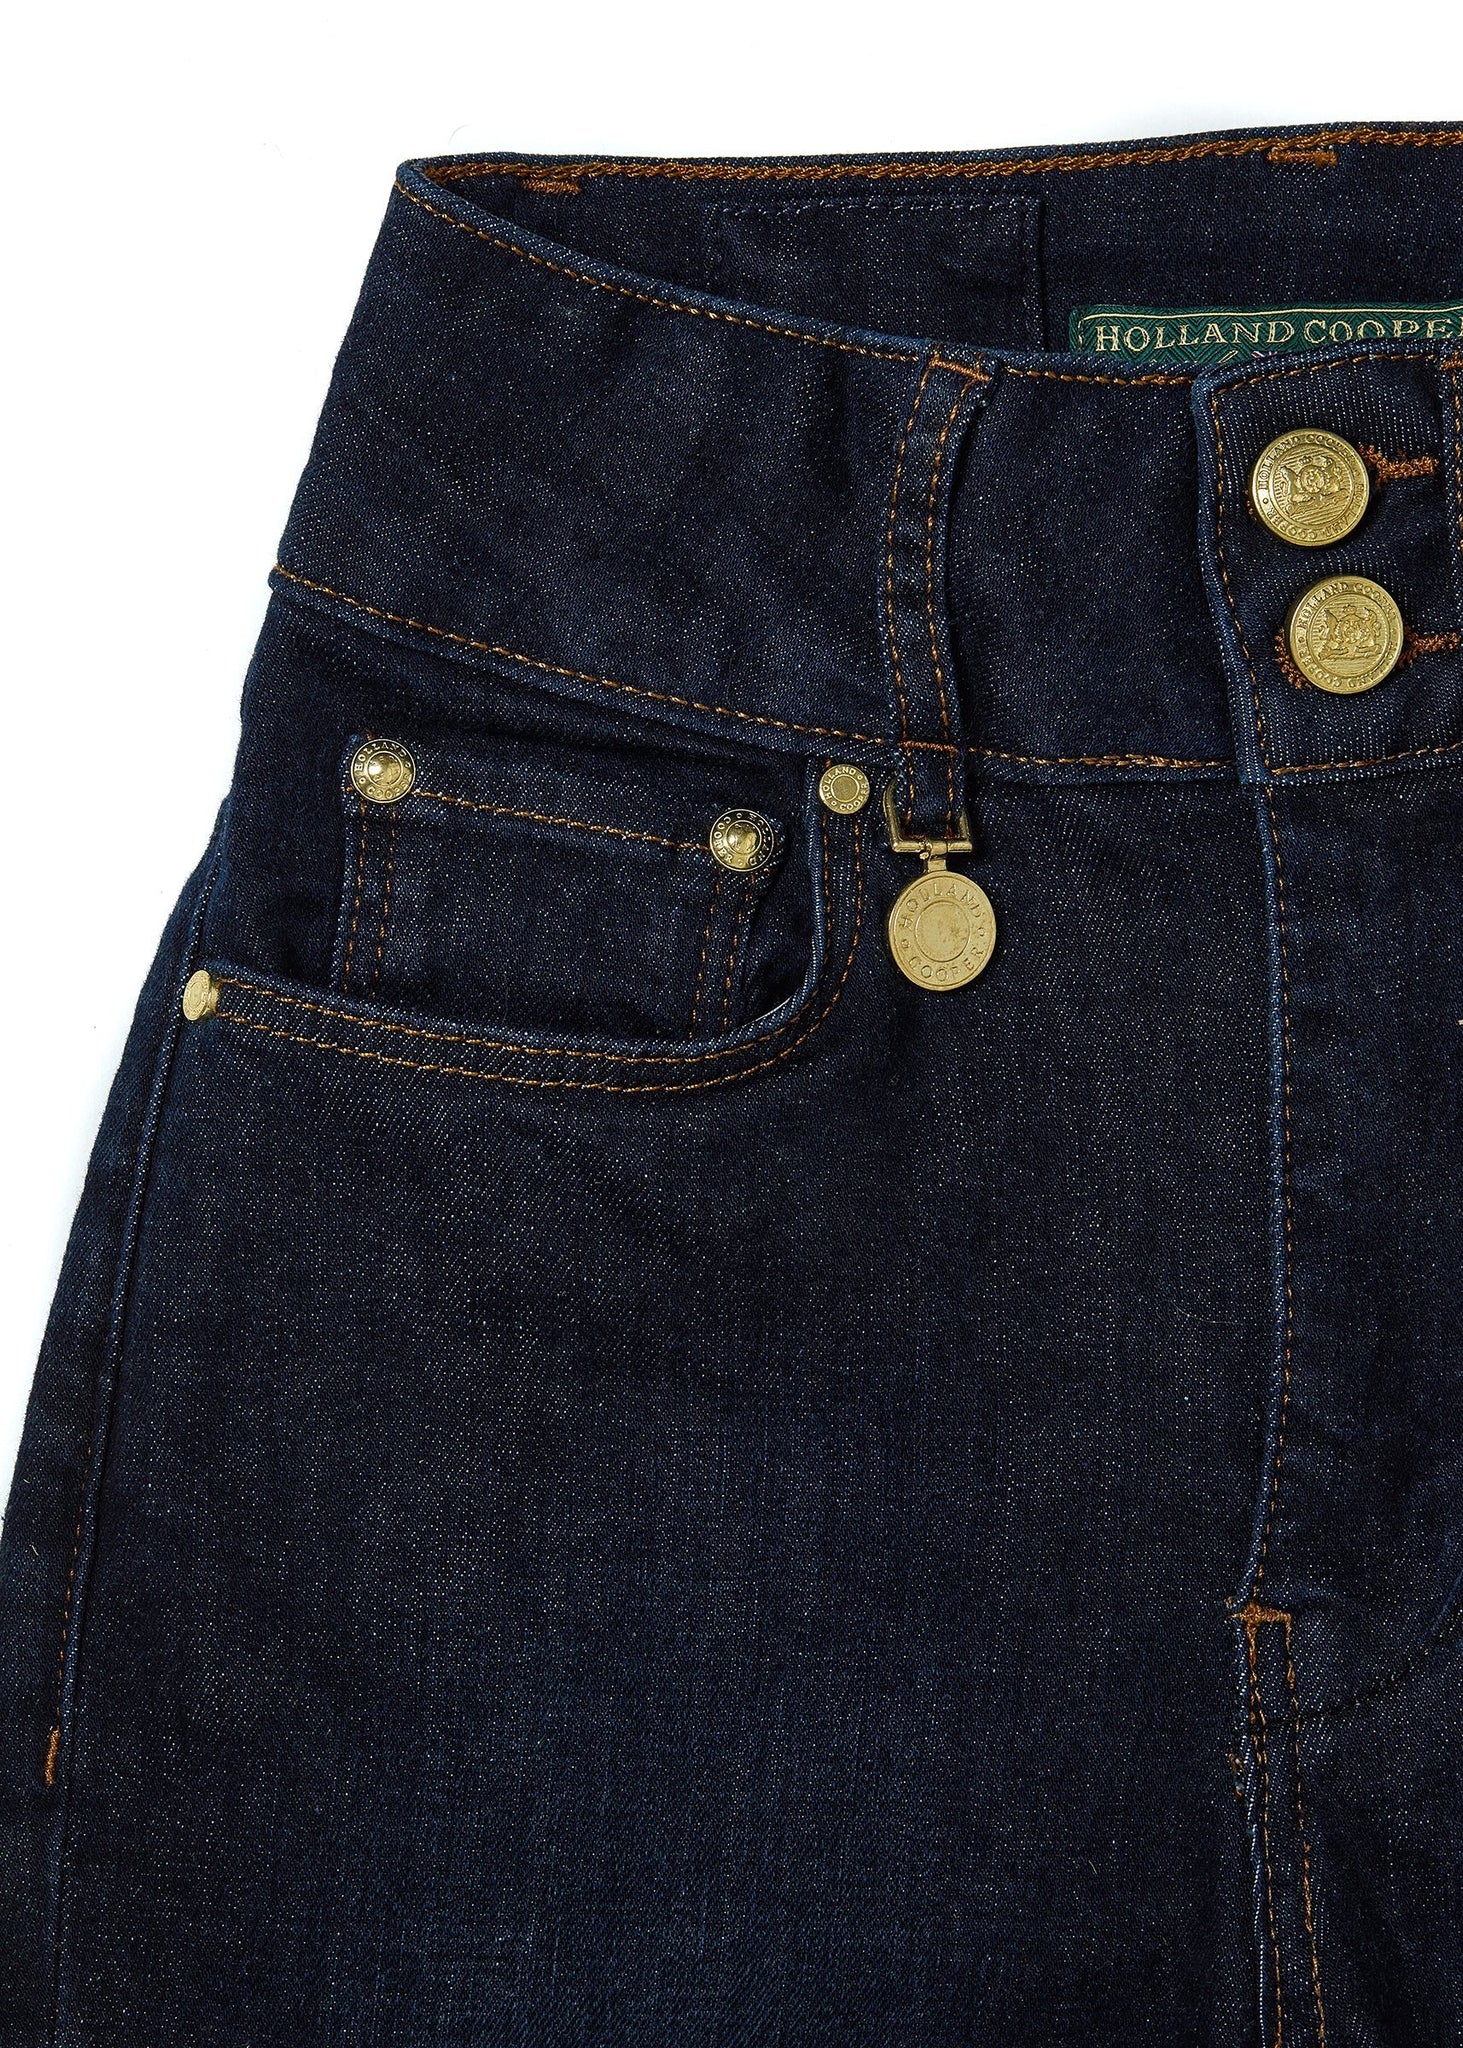 front pocket detail on womens high rise dark blue denim flared jean with centre front zip fly fastening with two open pockets at the front and back with gold hardware on back waistband 